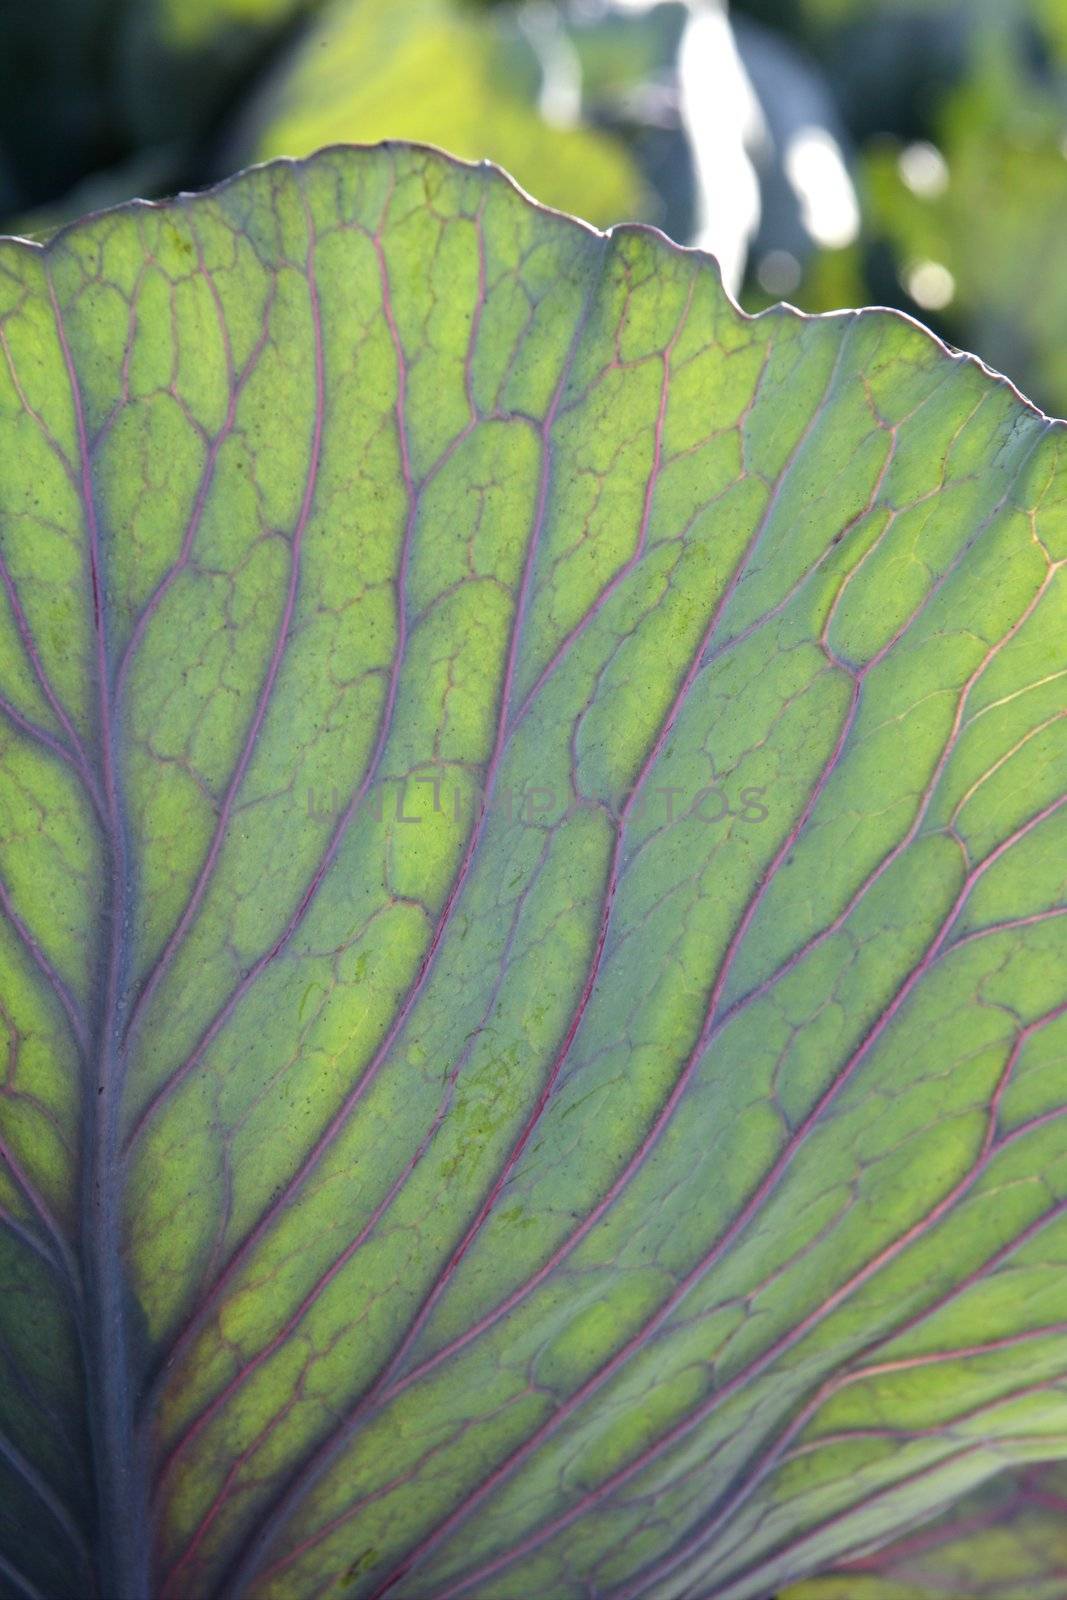 Agriculture in Spain, cabbage cultivation fields in Valencia area. Green leaf macro detail